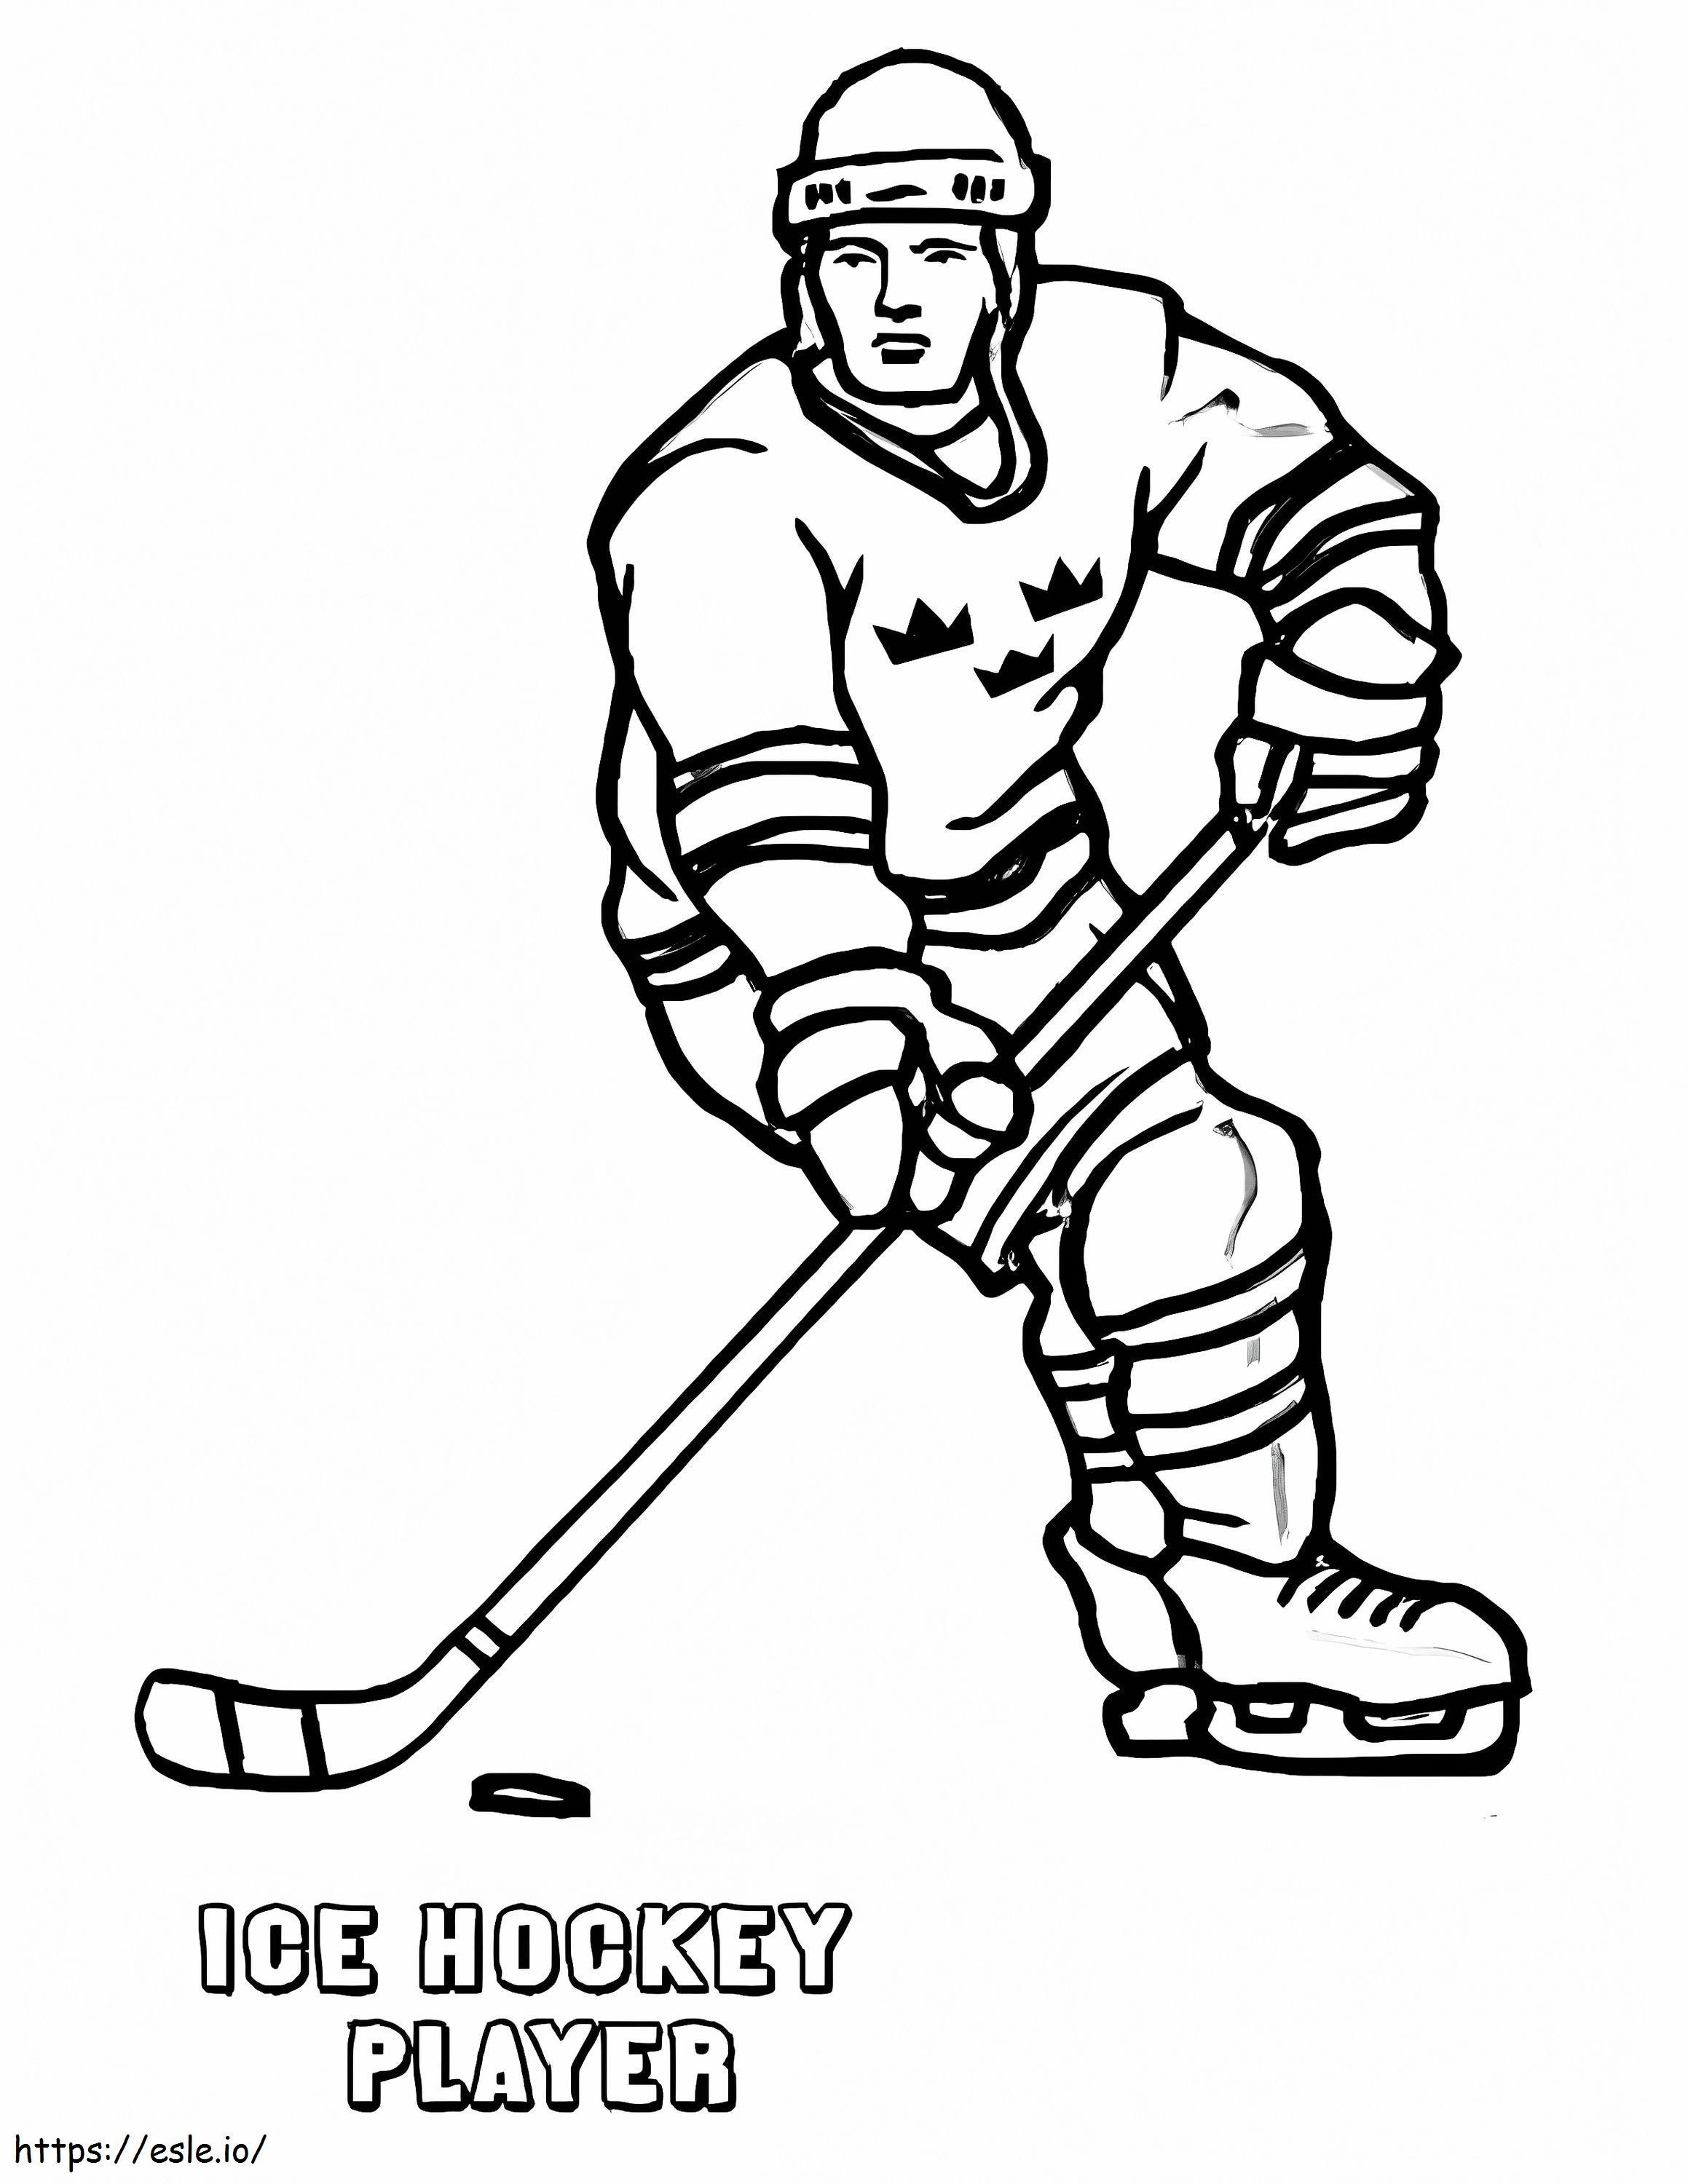 Basic Ice Hockey Player coloring page